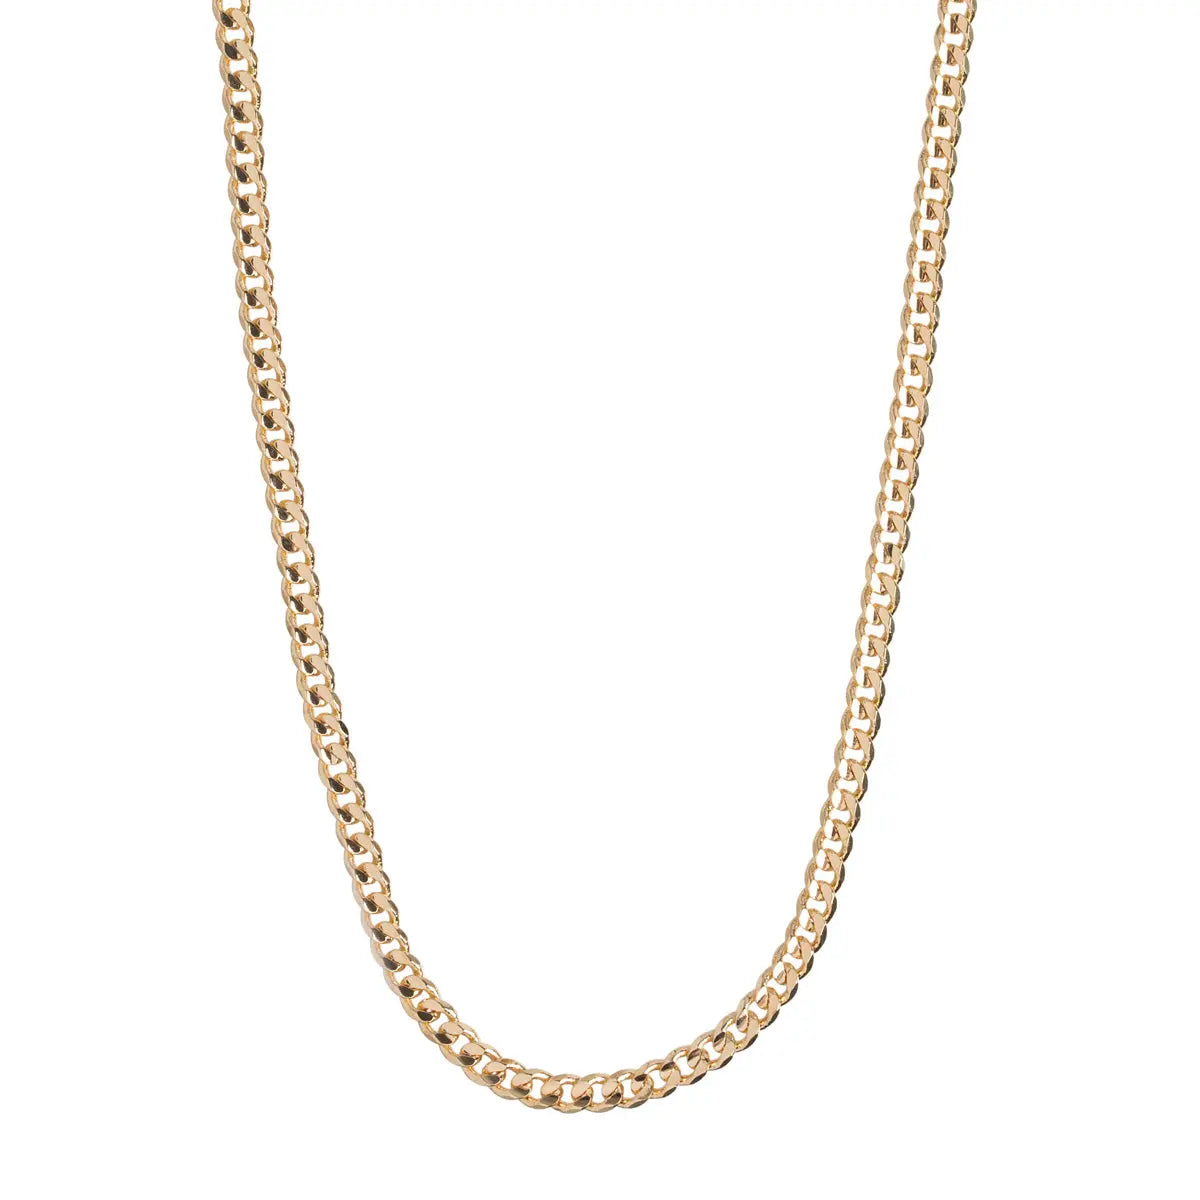 "Essential Chain Necklace"